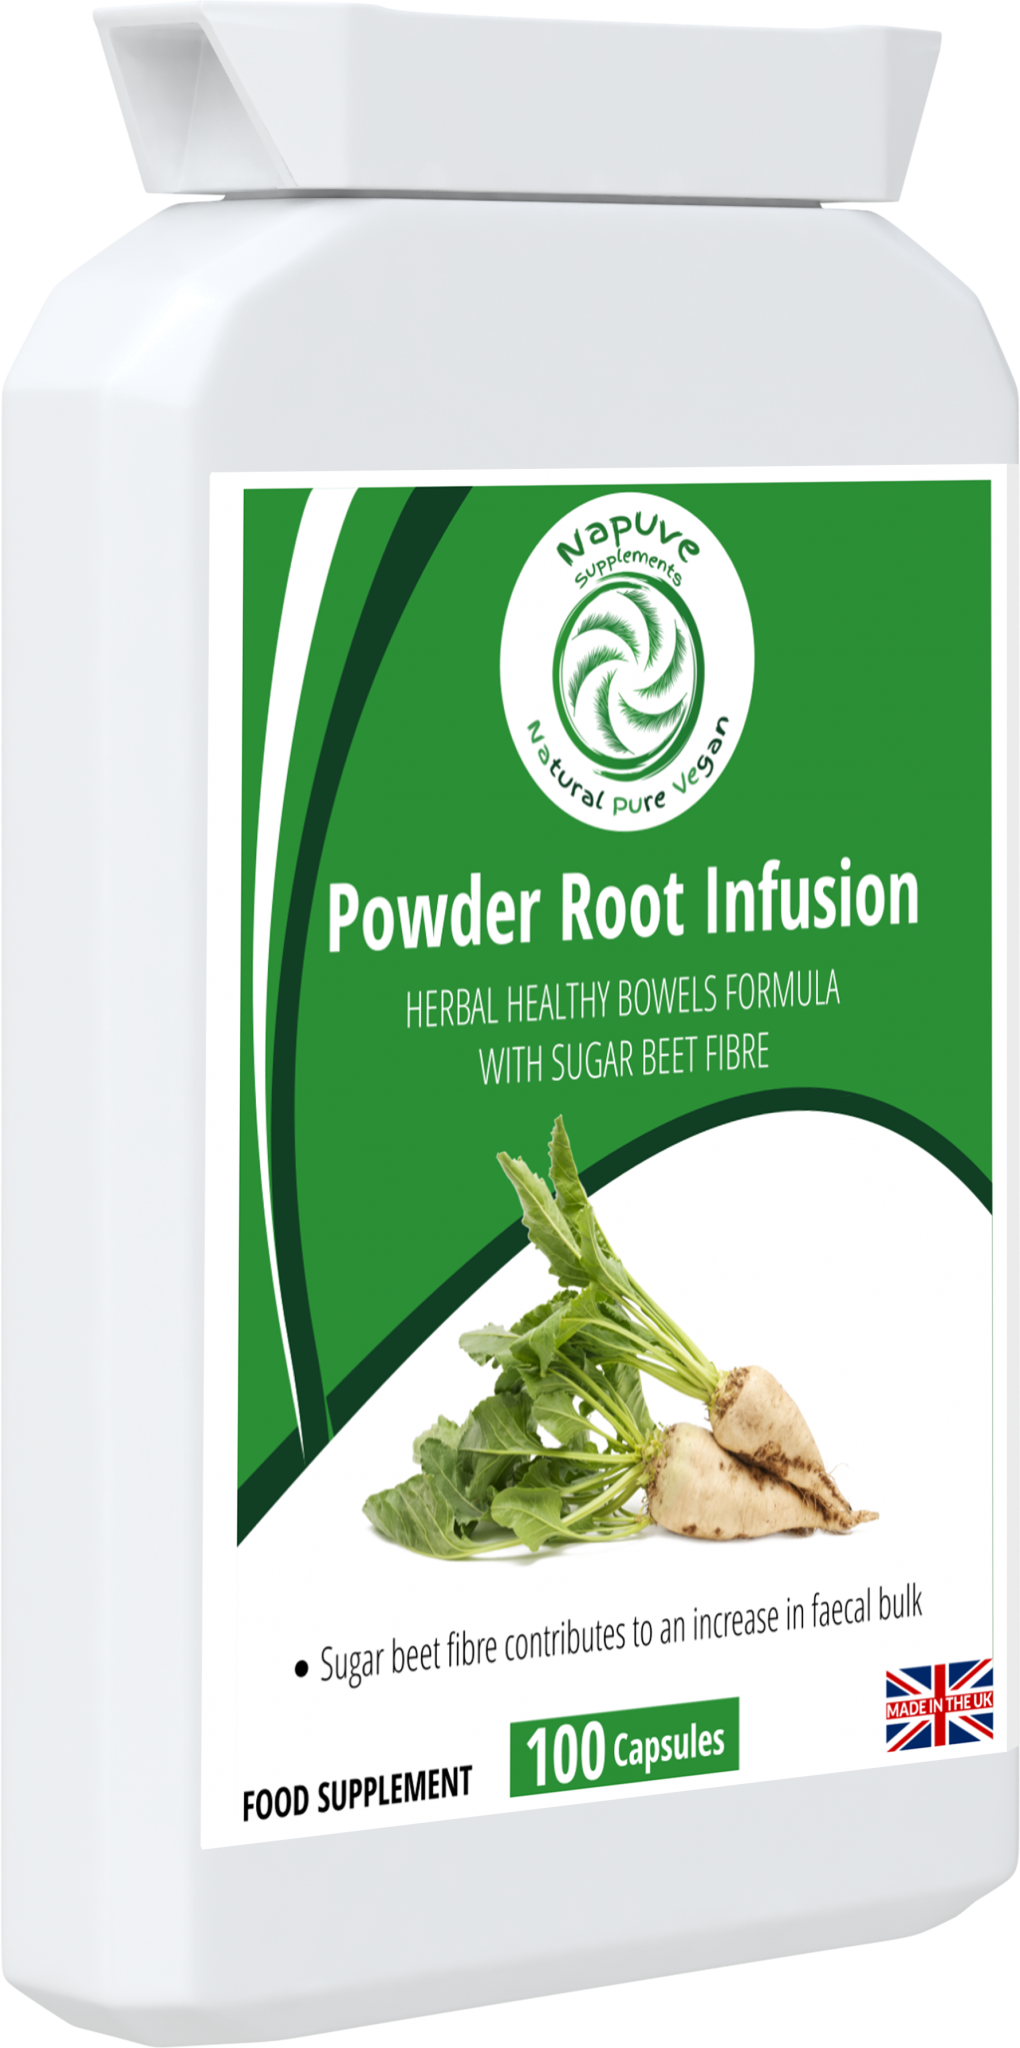 Powder Root Infusion - Herbal colonics complex (with sugar beet fibre)